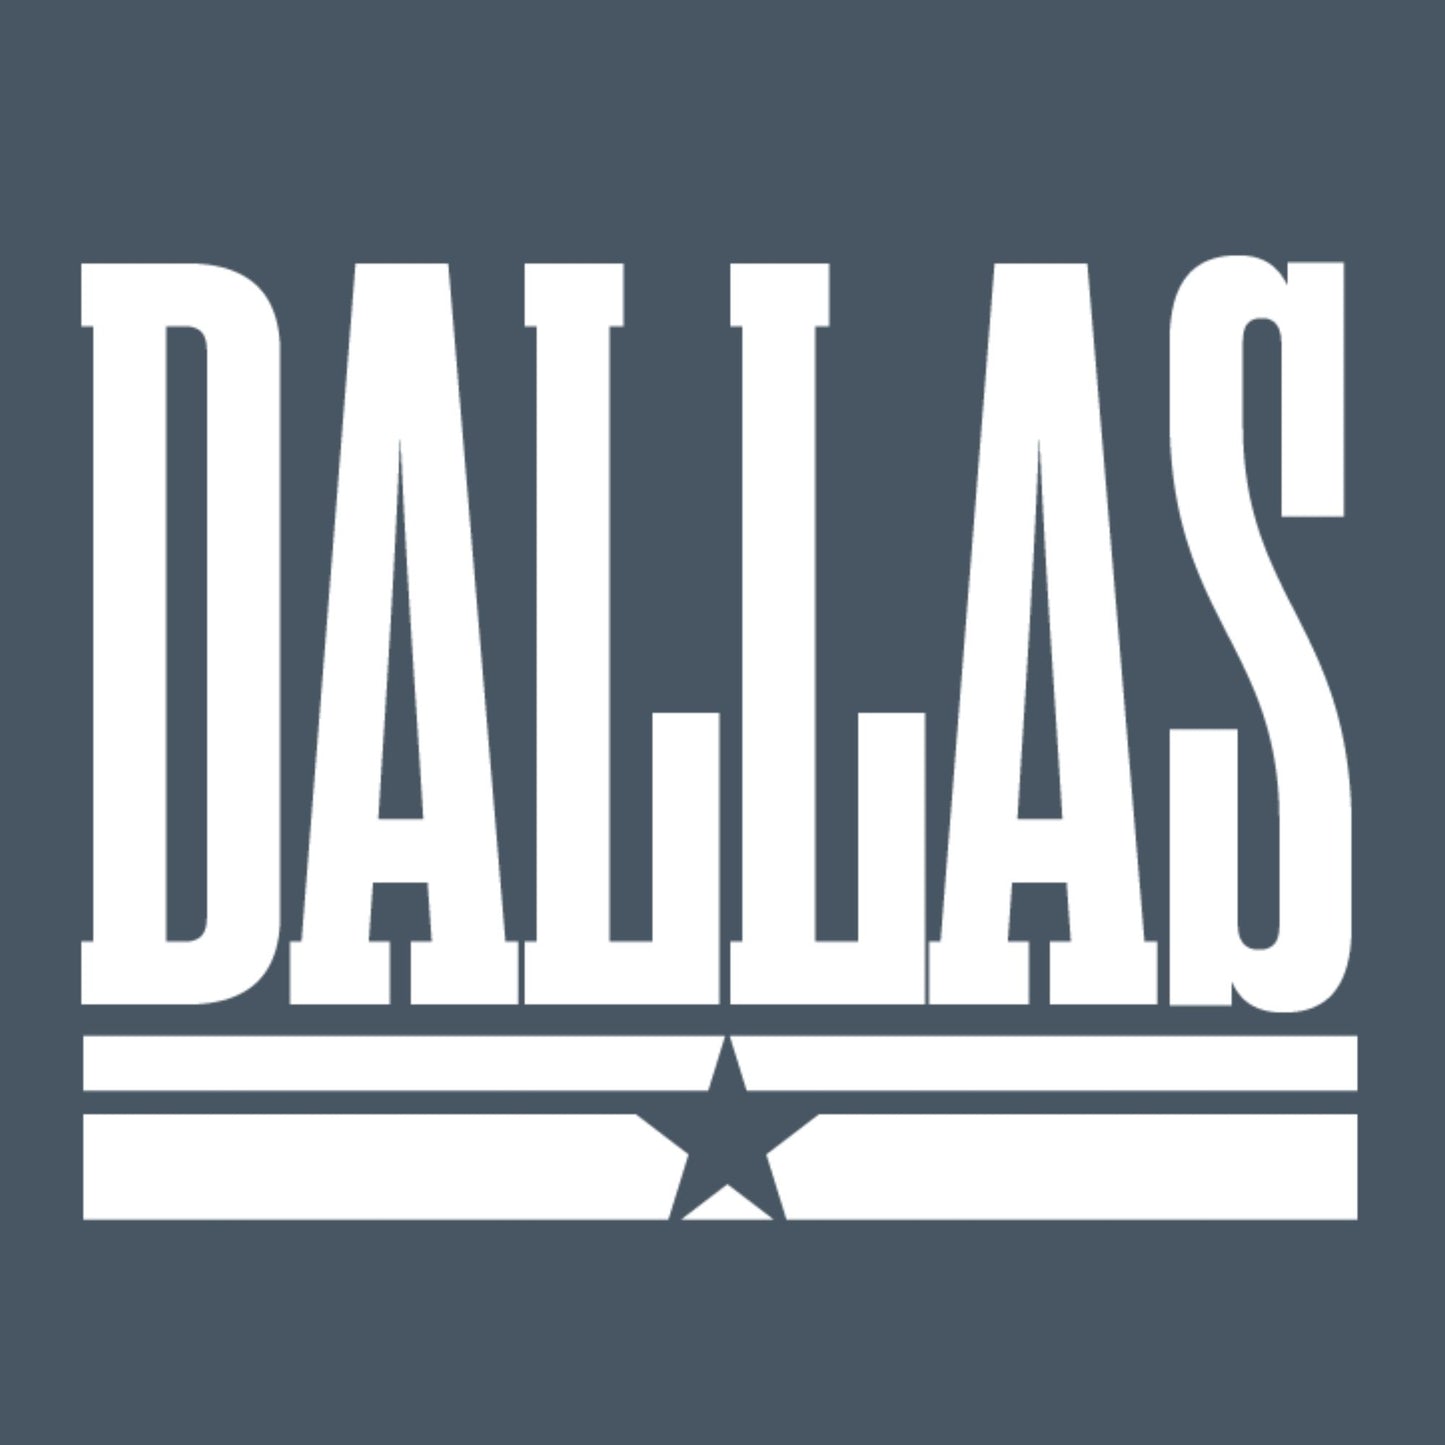 Big and Bold 'DALLAS' T-Shirt - Trendy and Bold Urban Apparel for Dallas Enthusiasts | Comfortable Fit, High-Quality Cotton |